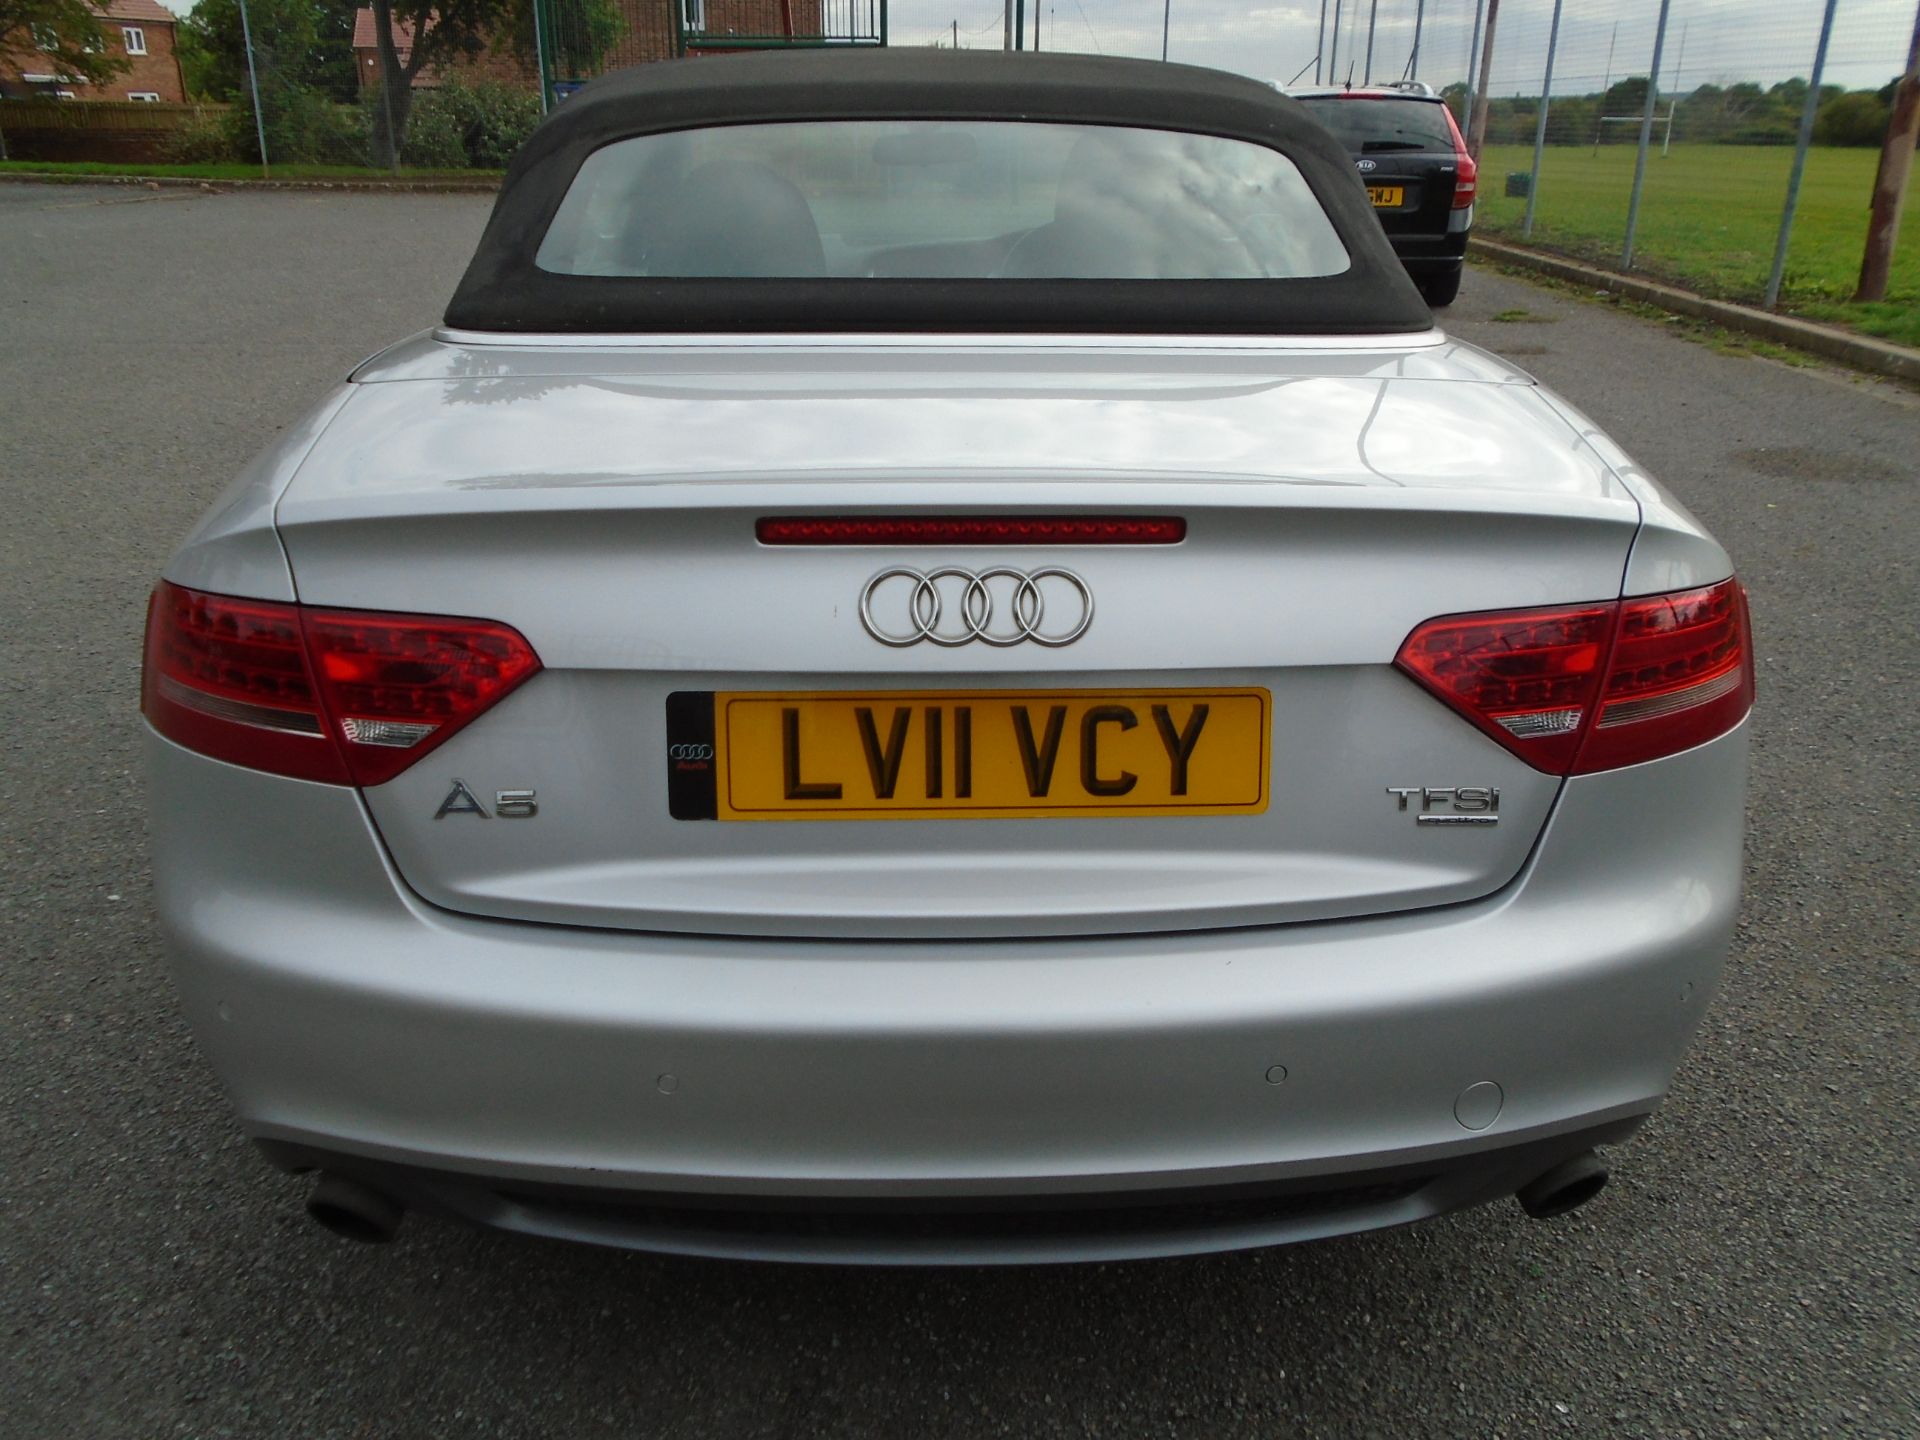 2011 AUDI A5 S LINE TFSI CVT SILVER CONVERTIBLE , STEERING WHEEL WITH LUDING PADDLE *NO VAT* - Image 5 of 11